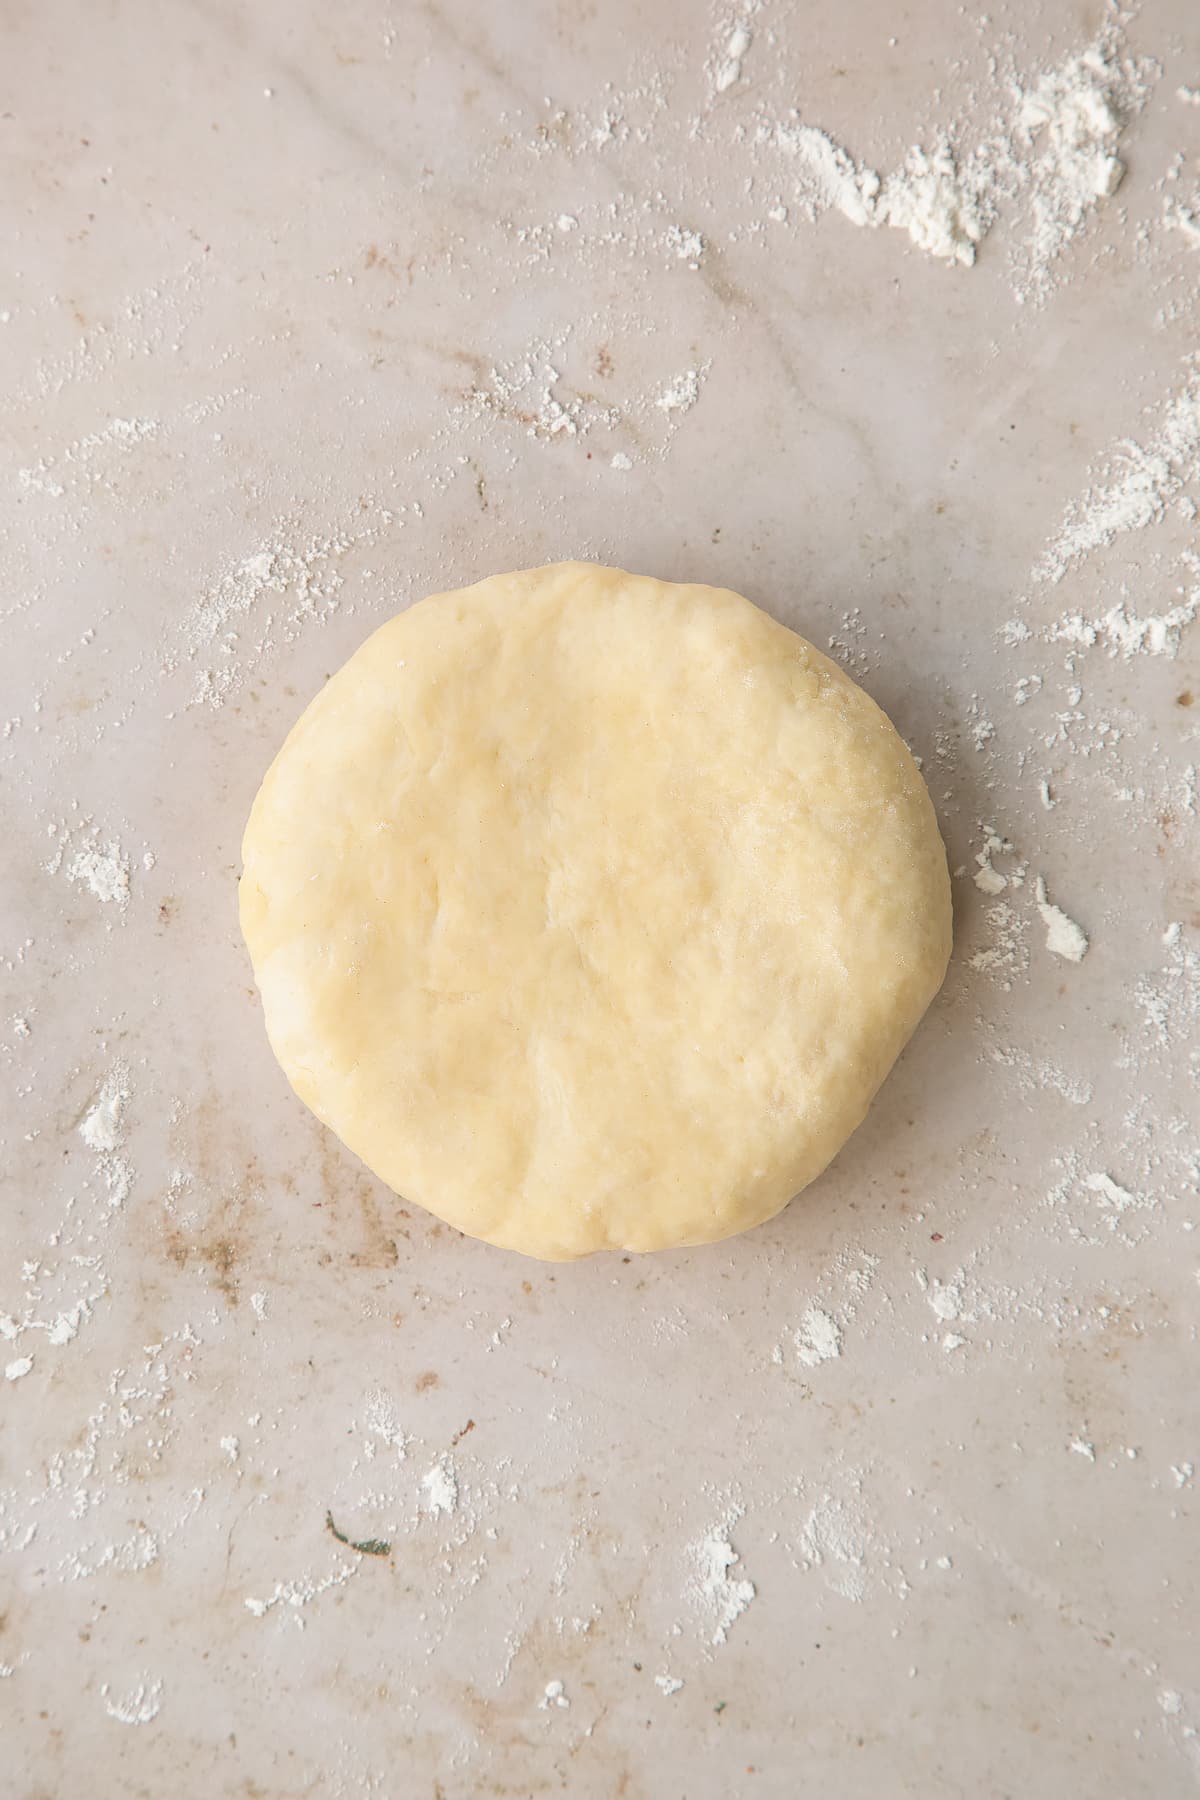 Overhead shot of the flattened pastry mixture on a lightly floured surface.